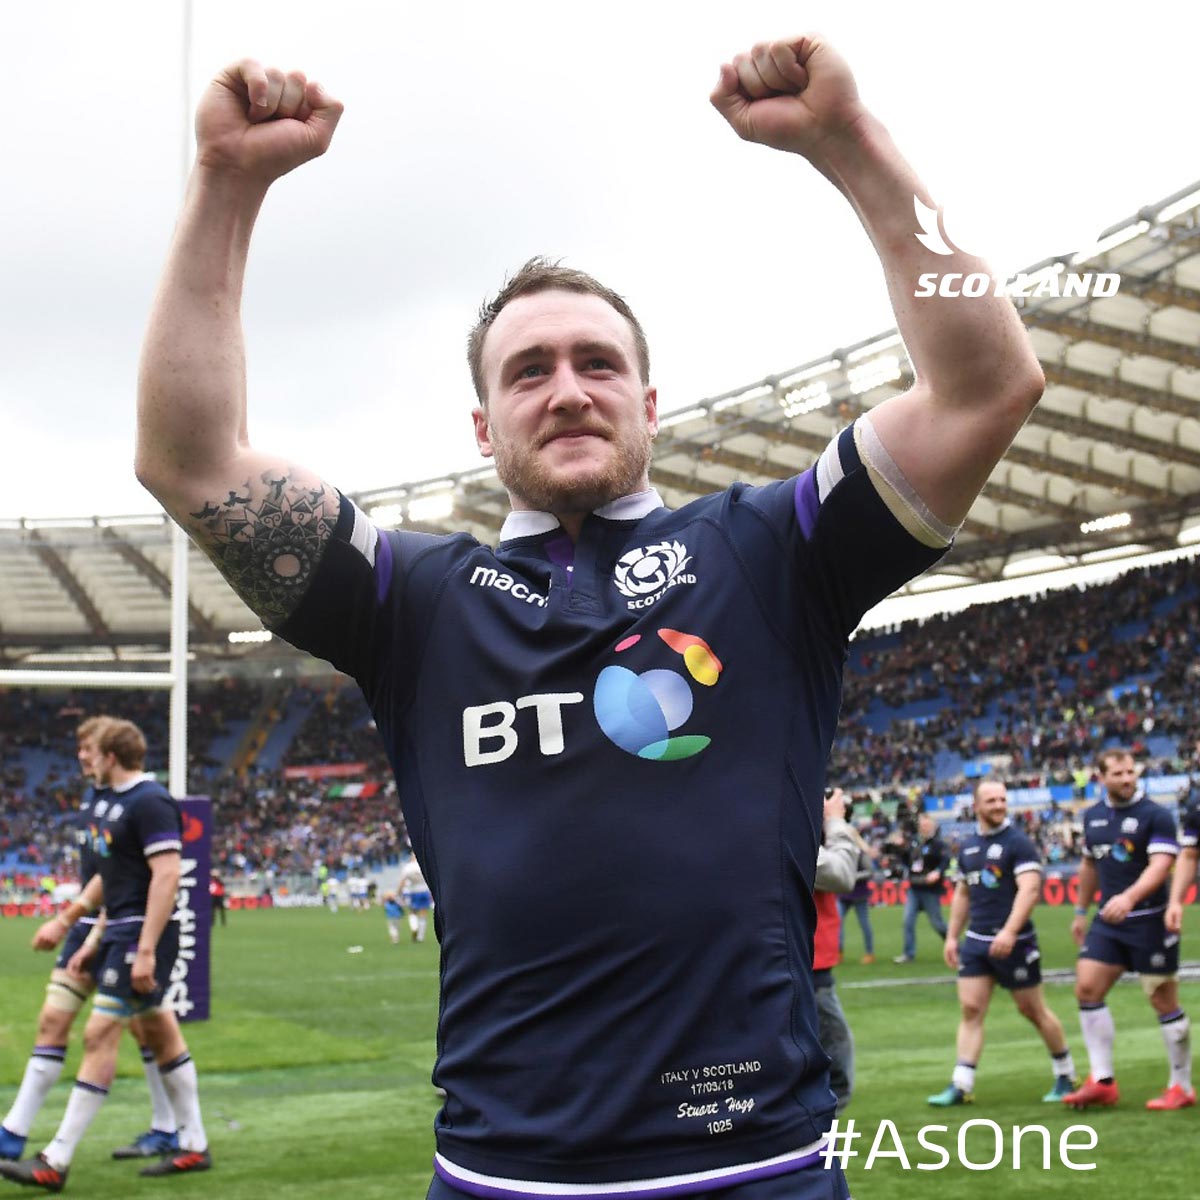 Thank you 🏴󠁧󠁢󠁳󠁣󠁴󠁿 for your support during the 2018 #NatWest6Nations! 👏

#AsOne